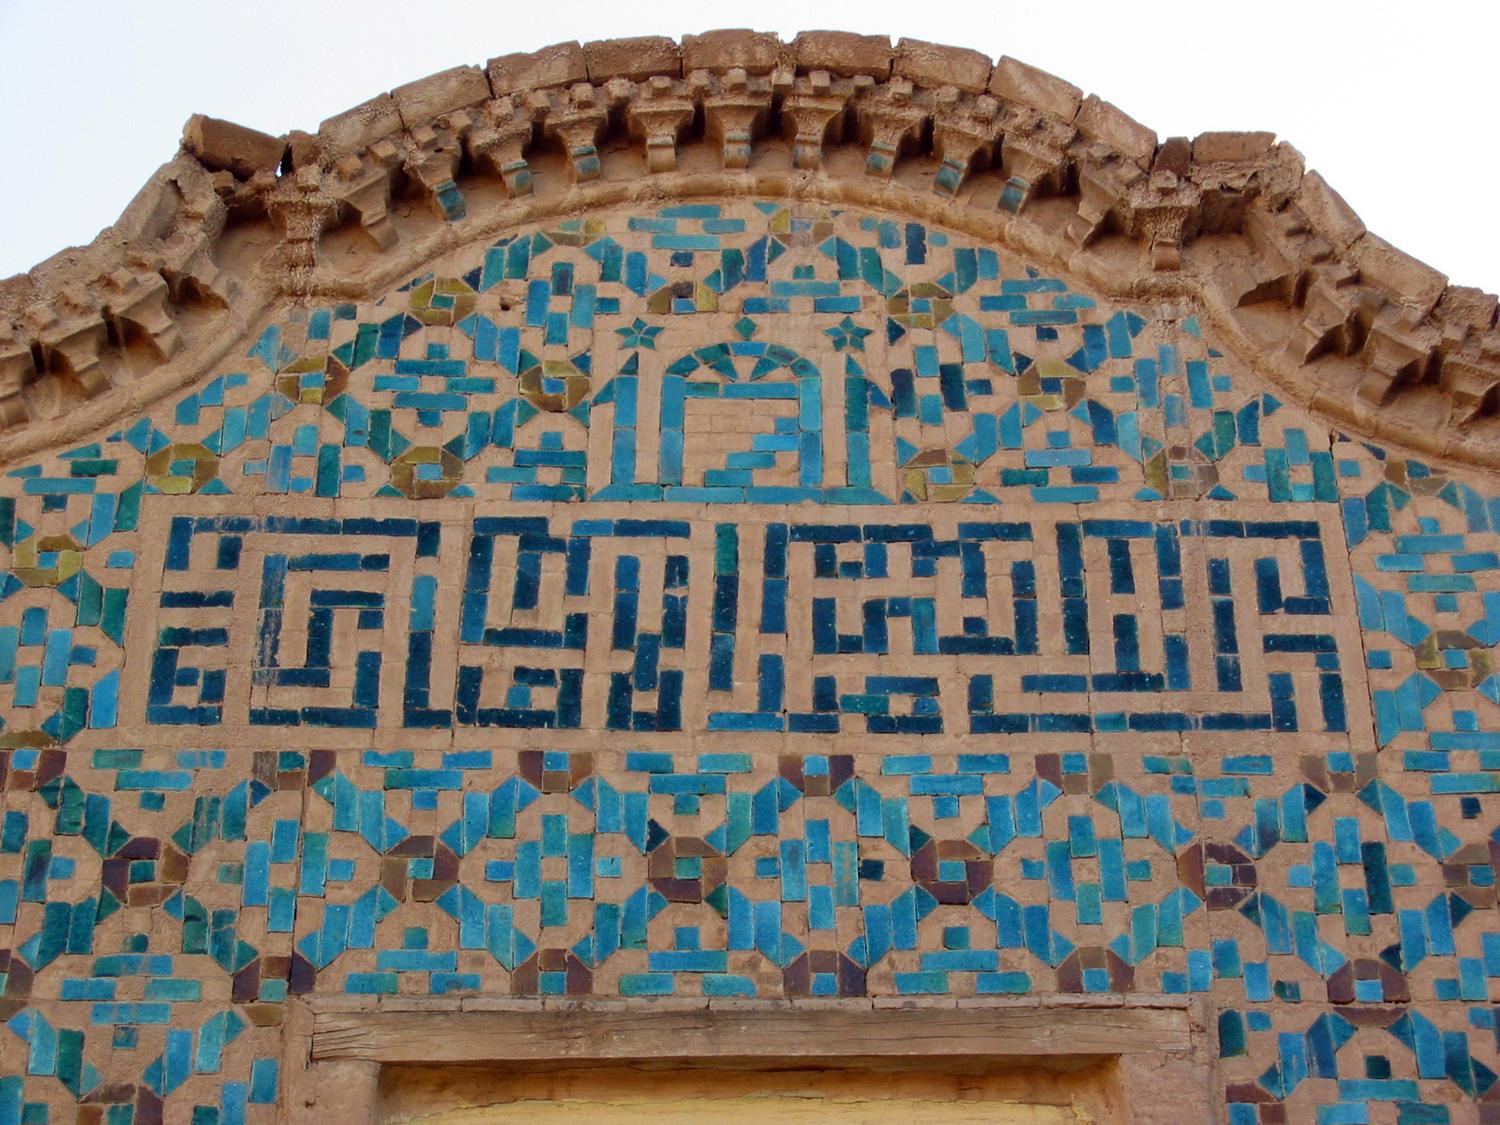 South wing, detail of tilework